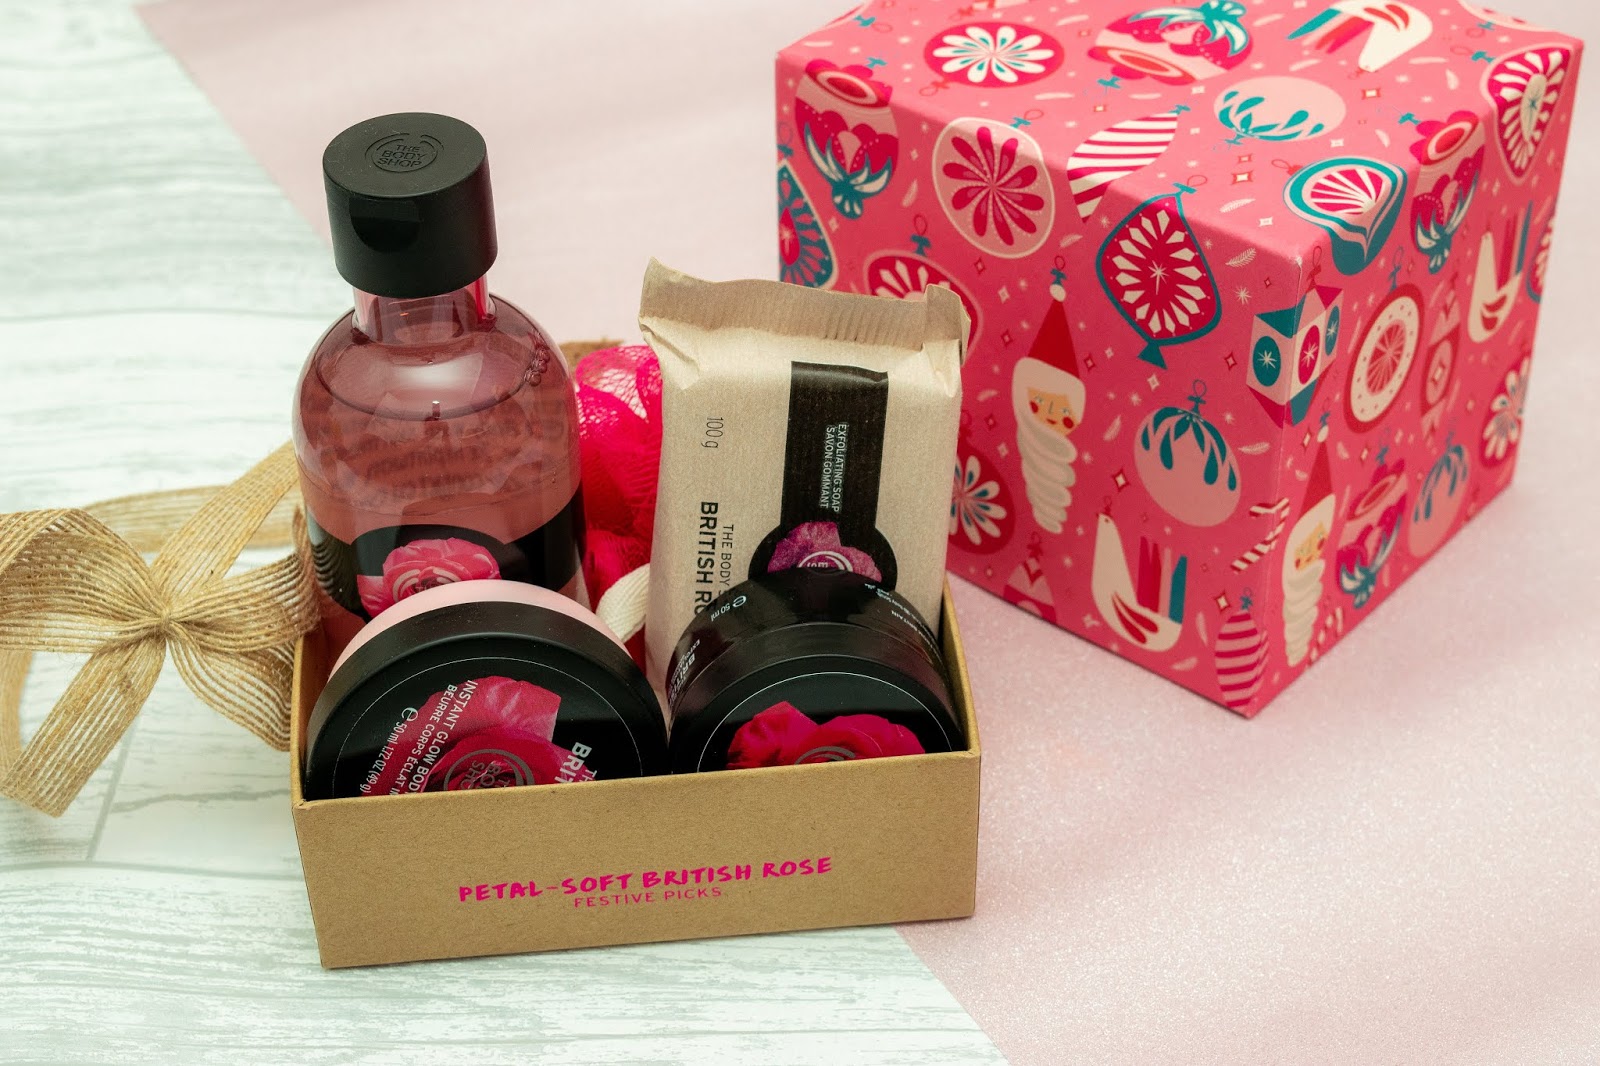 A selection of soap, scrubs, shower gels in pink packaging.